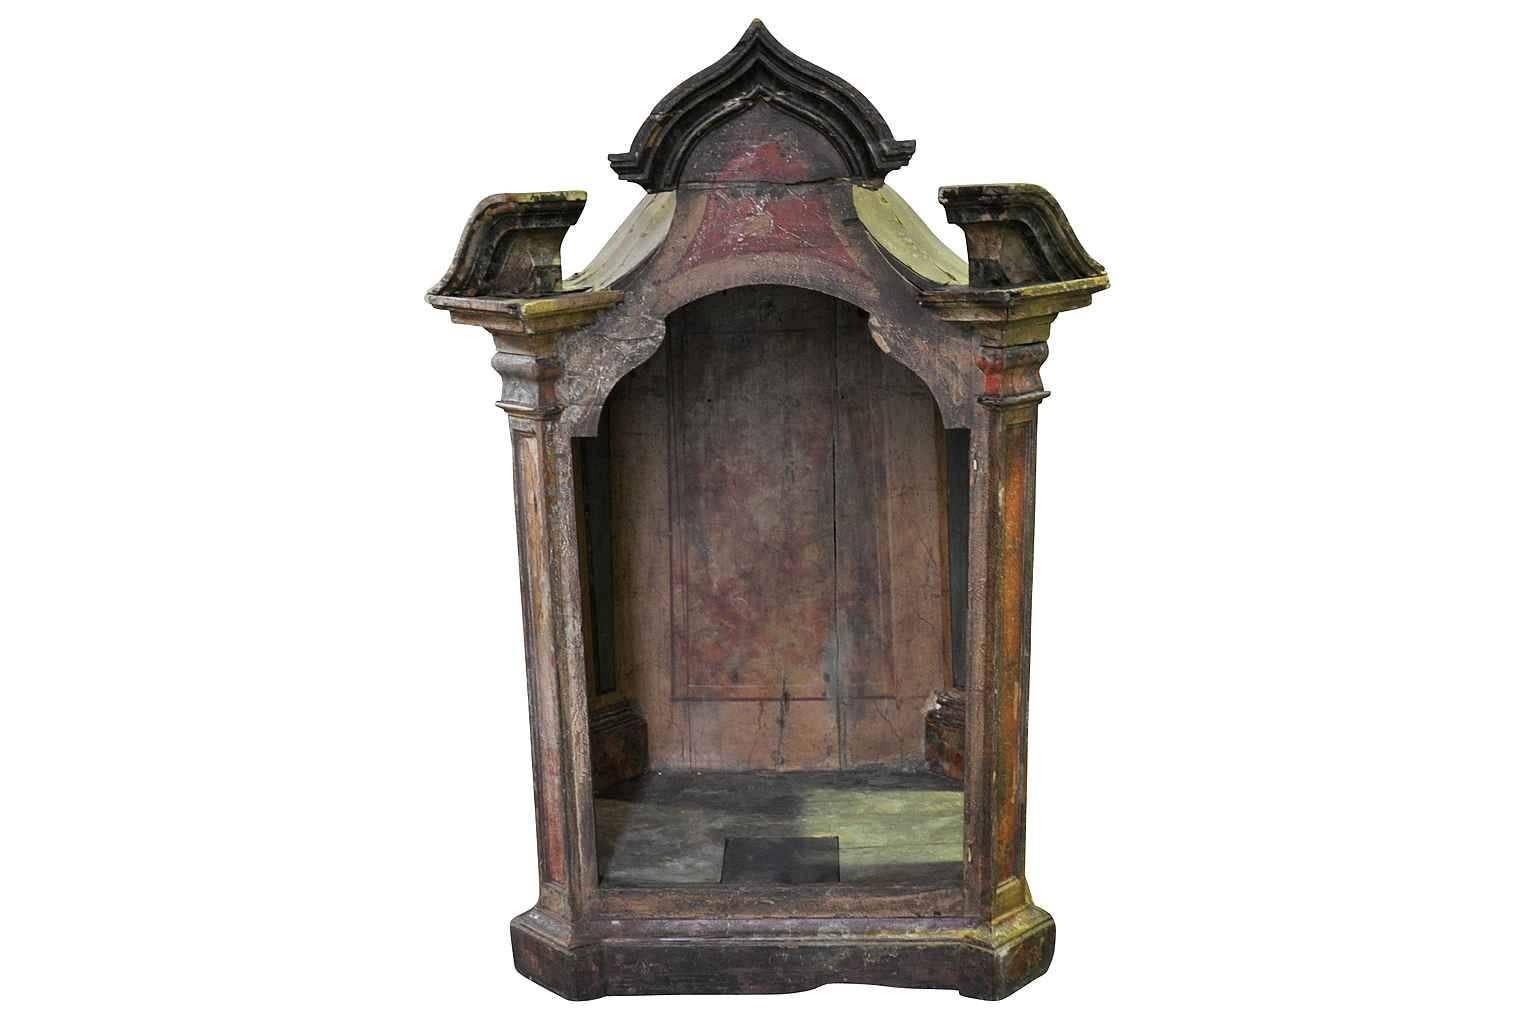 18th century spanish polychromed tabernacle, niche for the display of Santos. Original finish in somber tones of ochre and siena.